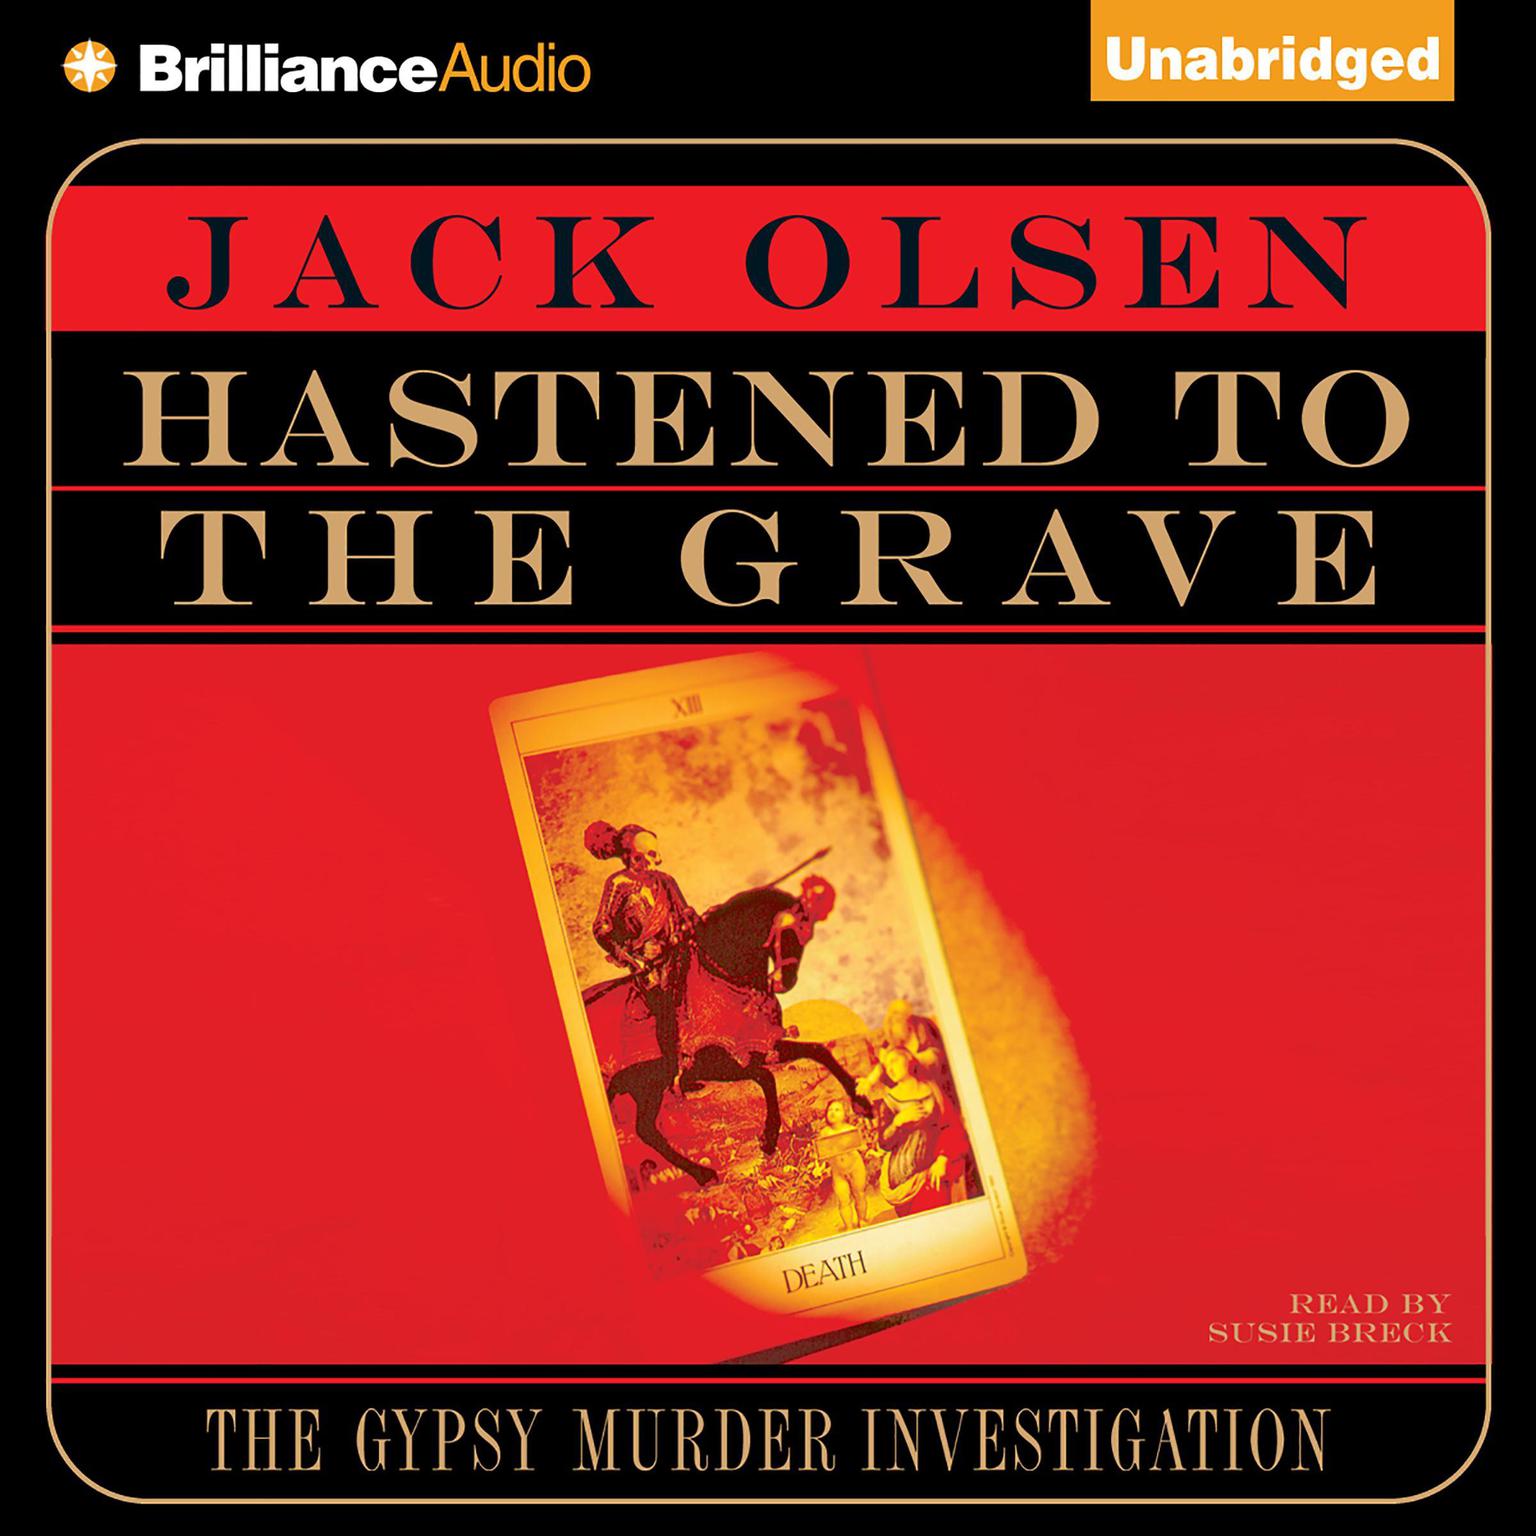 Hastened To the Grave: The Gypsy Murder Investigation Audiobook, by Jack Olsen